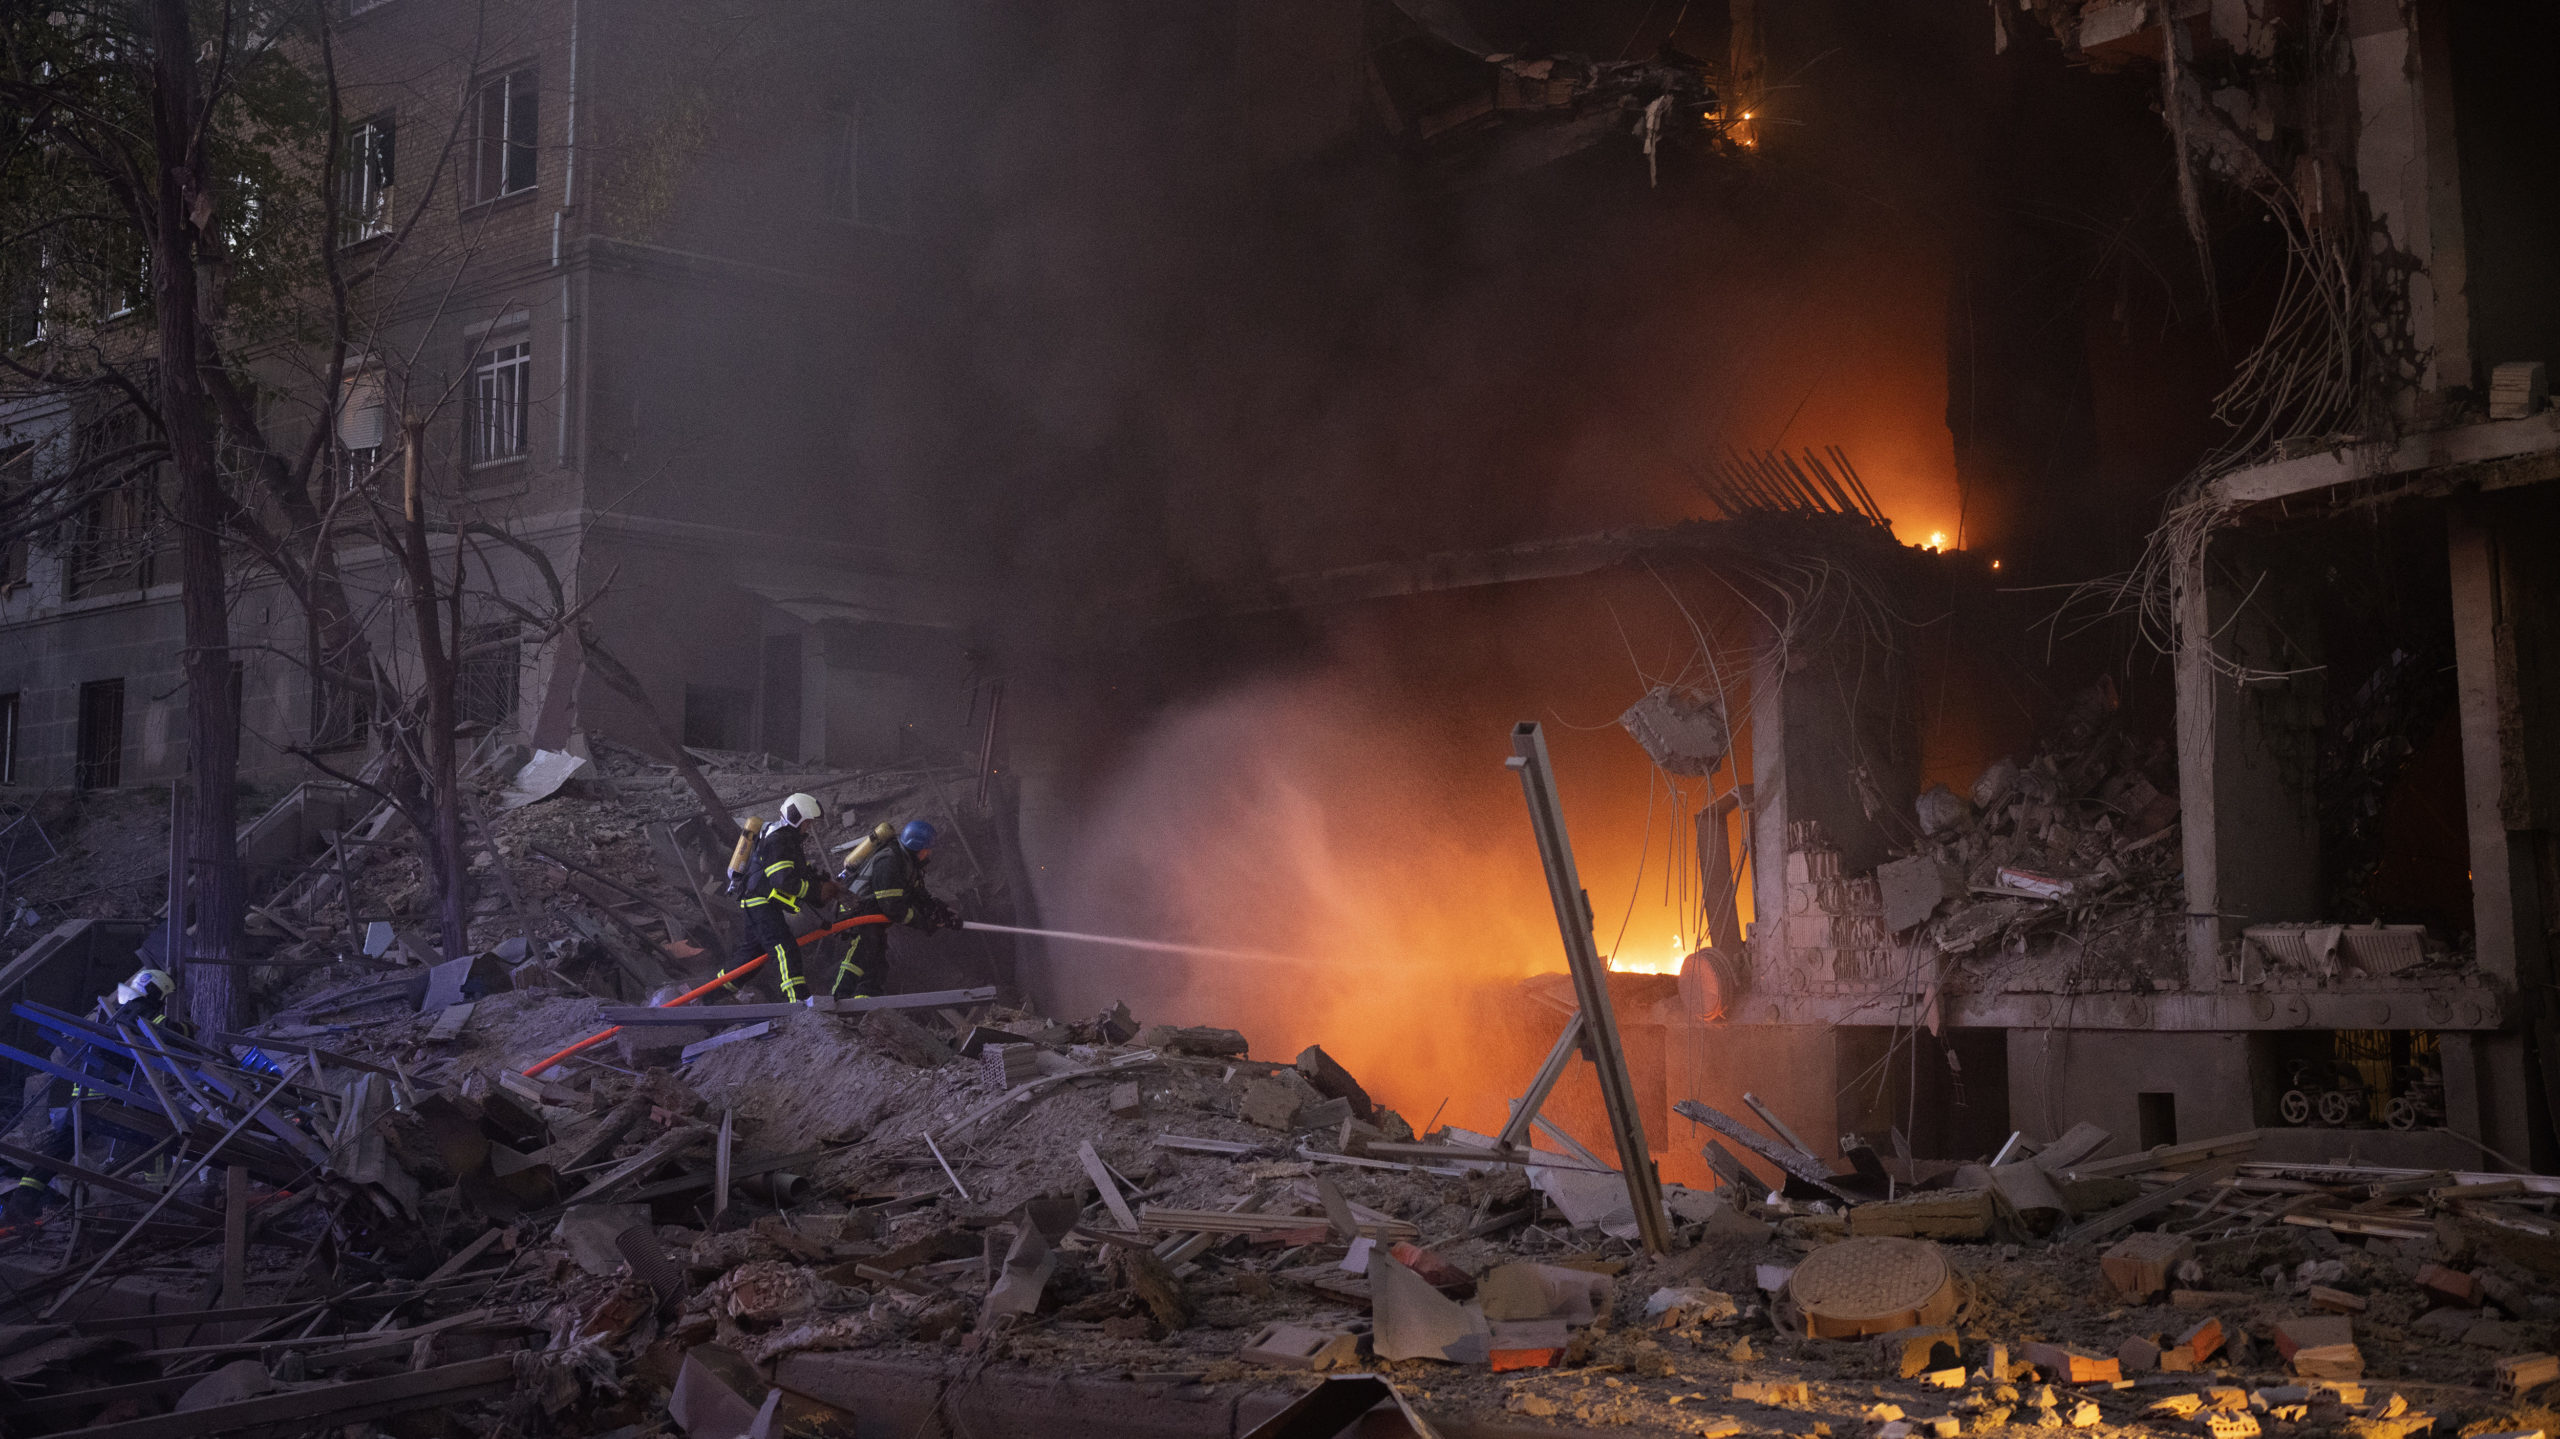 Firefighters try to put out a fire following an explosion in Kyiv, Ukraine on Thursday, April 28, 2...